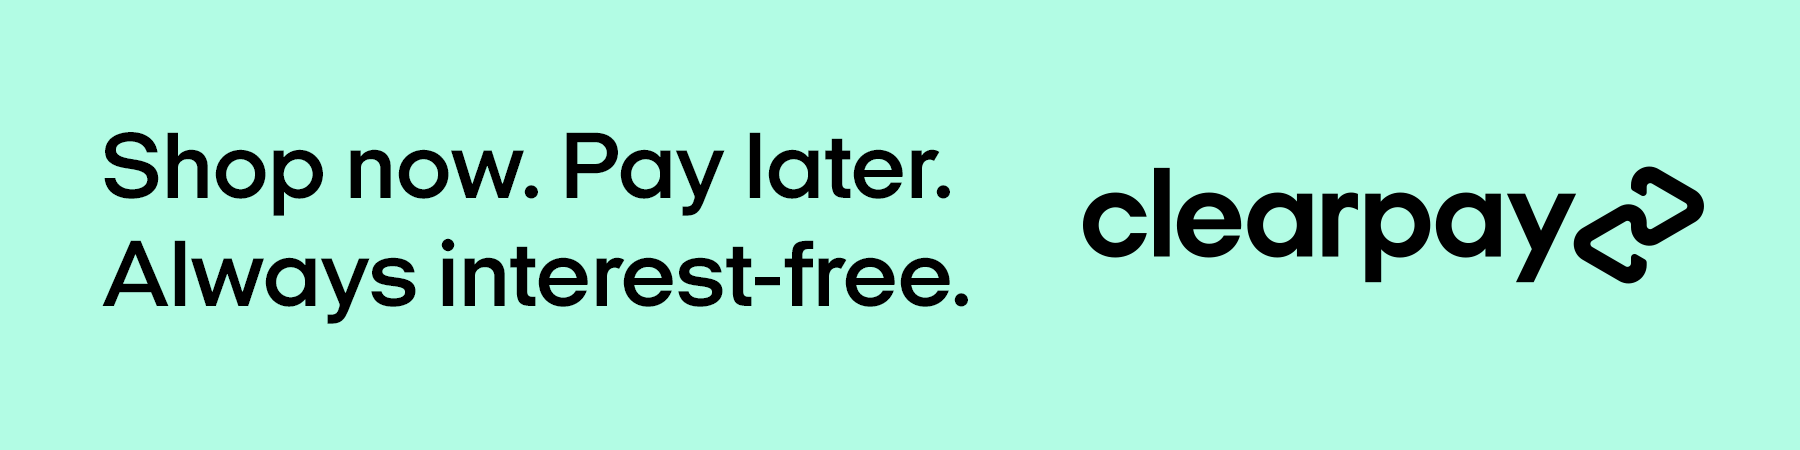 Shop now. Pay later. Always interest-free.